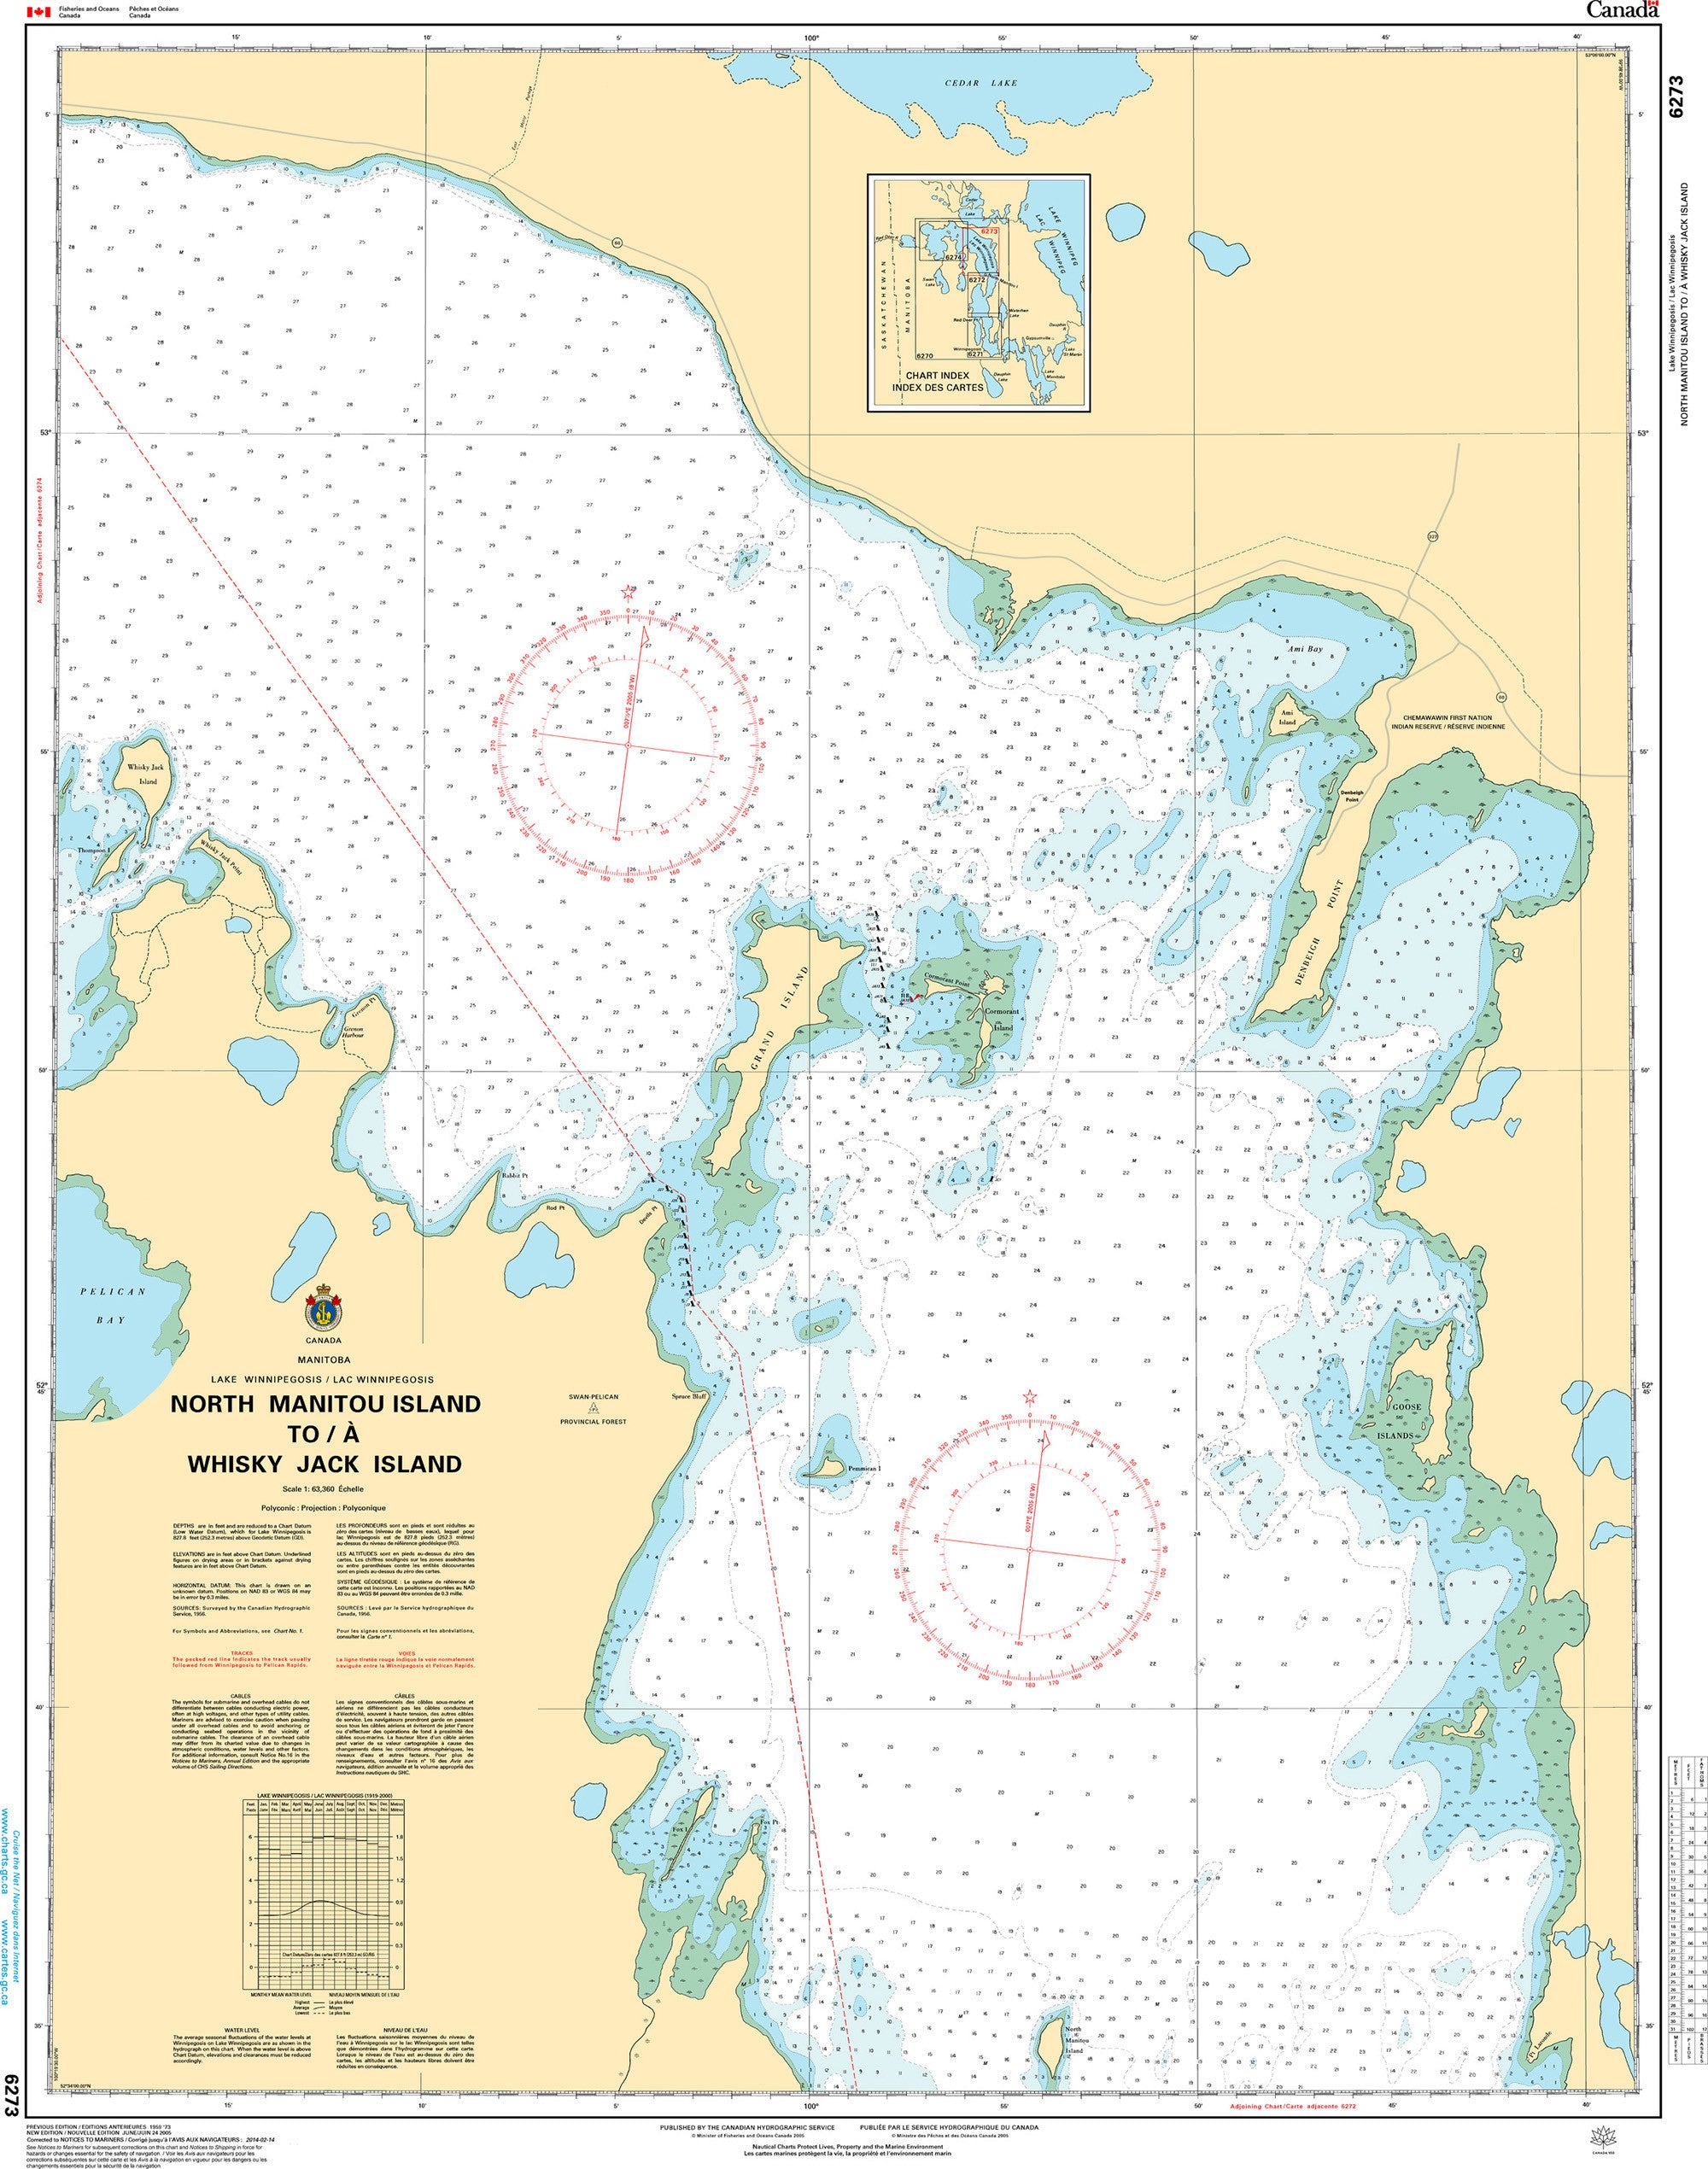 Canadian Hydrographic Service Nautical Chart CHS6273: North Manitou Island to/à Whiskey Jack Island